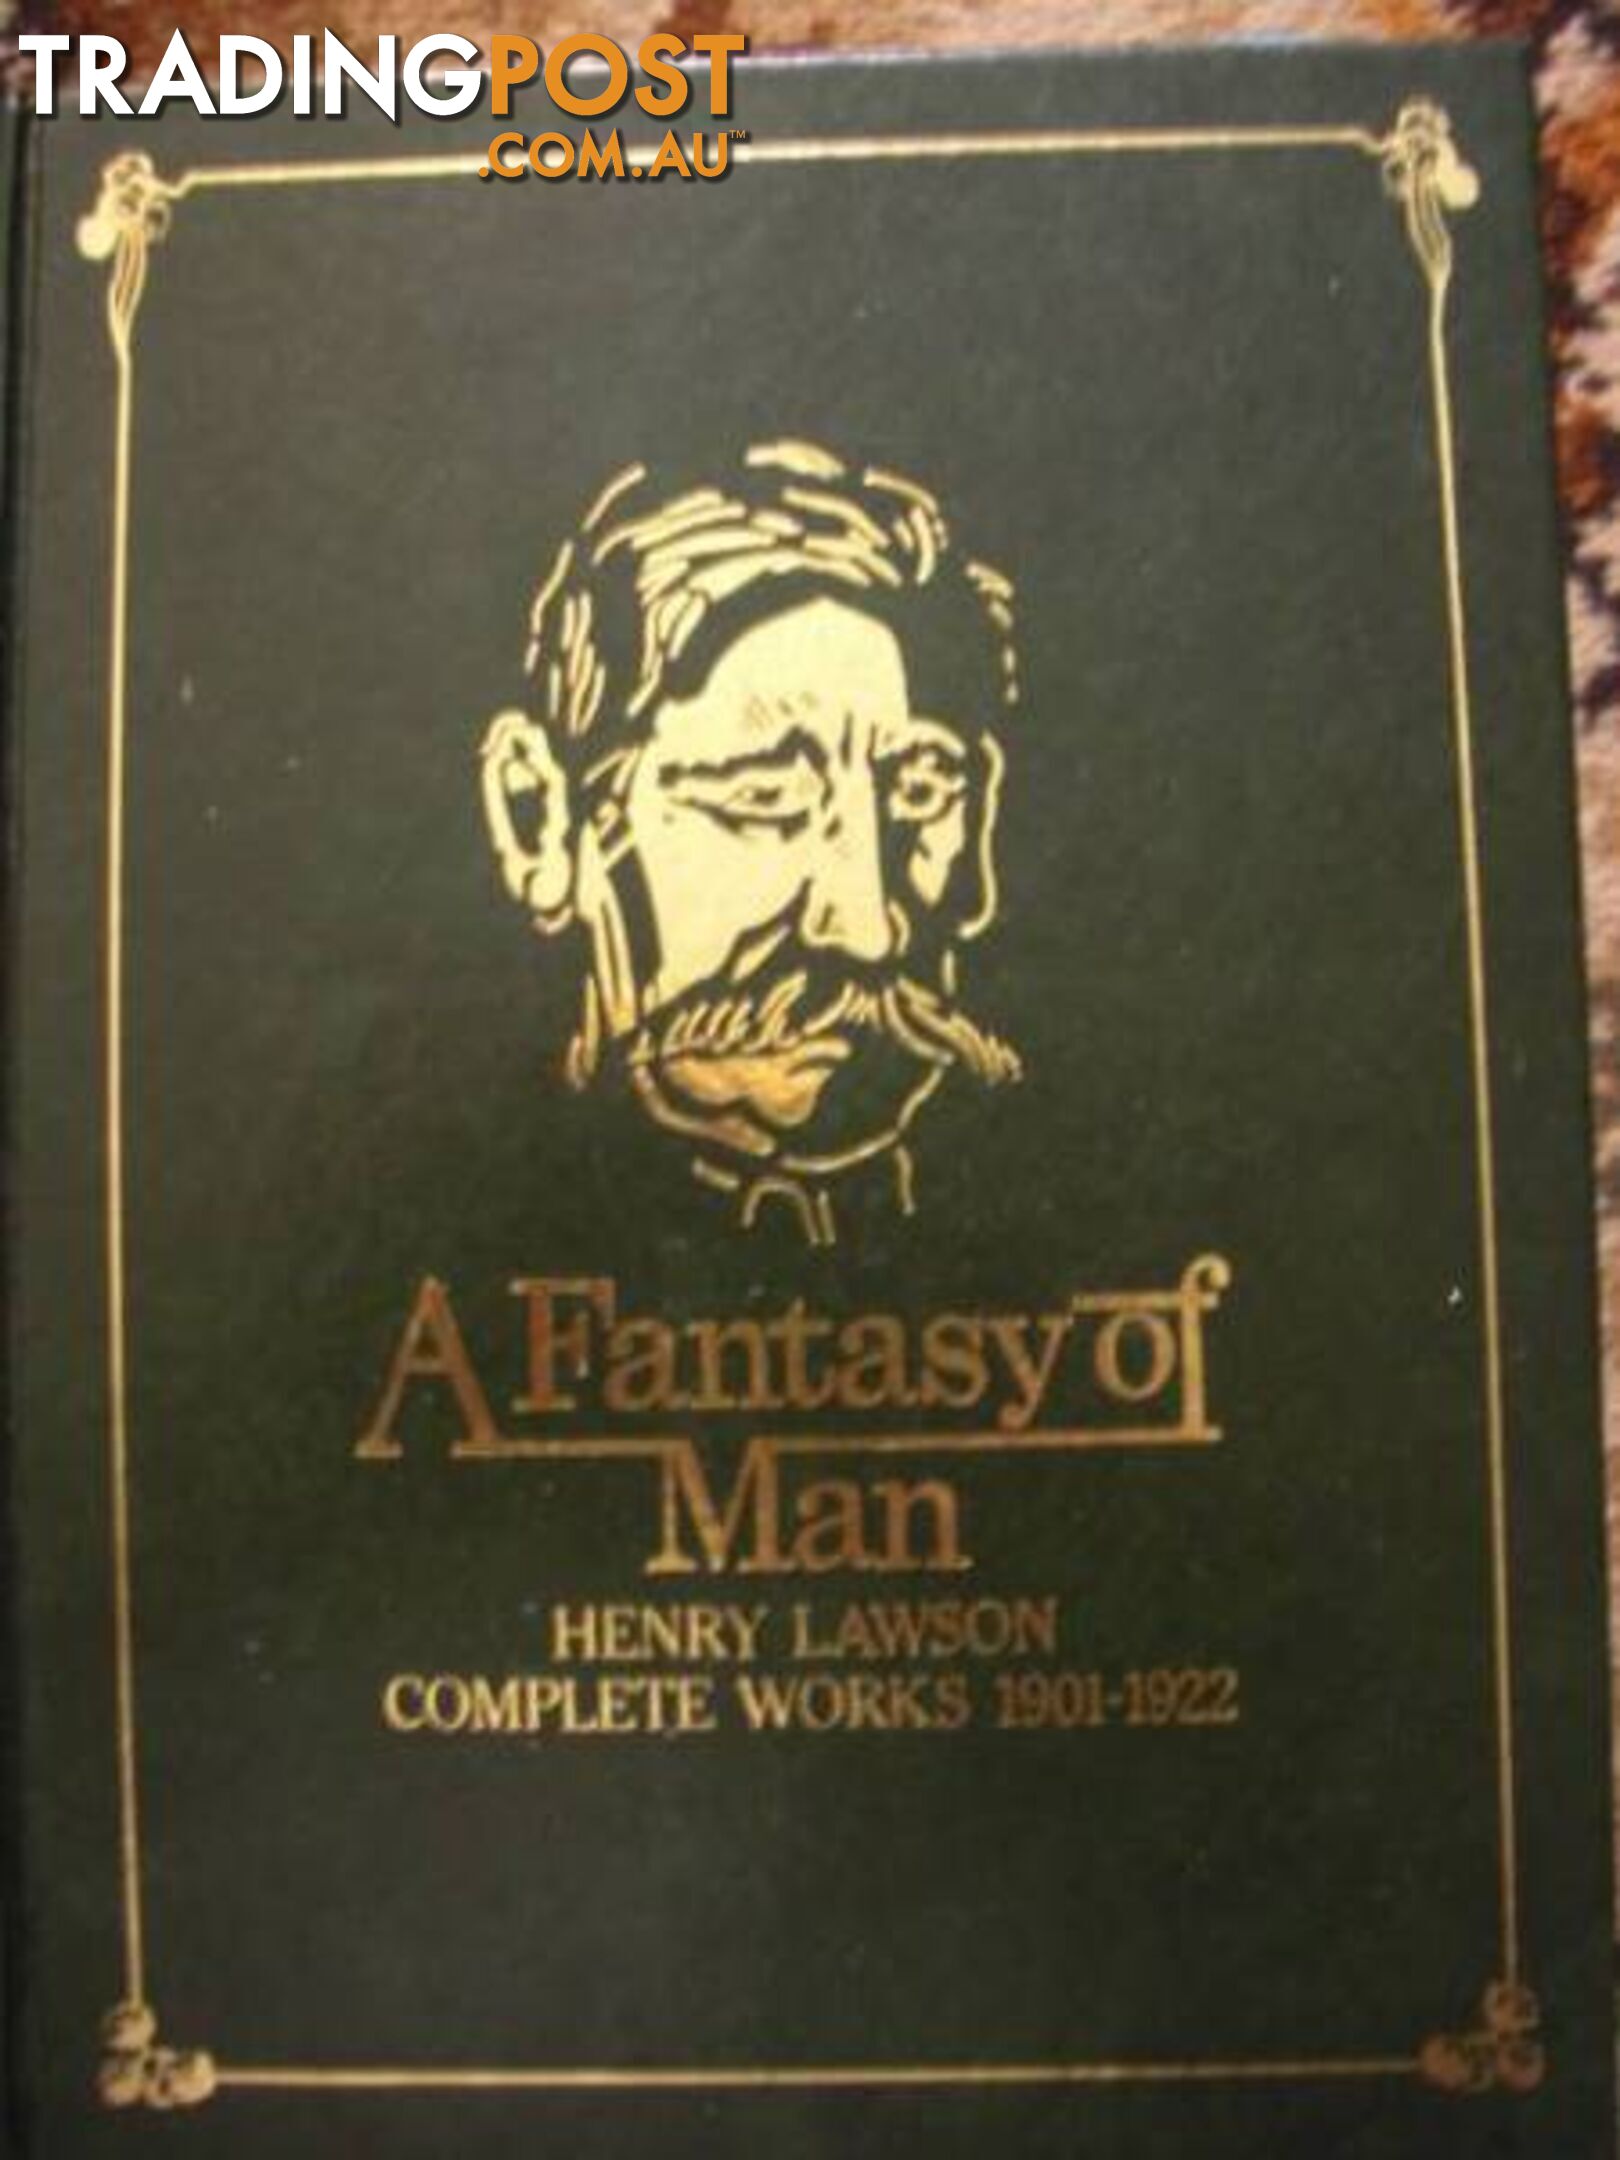 A Fantasy of Man Henry Lawson Complete******1922 Hardack